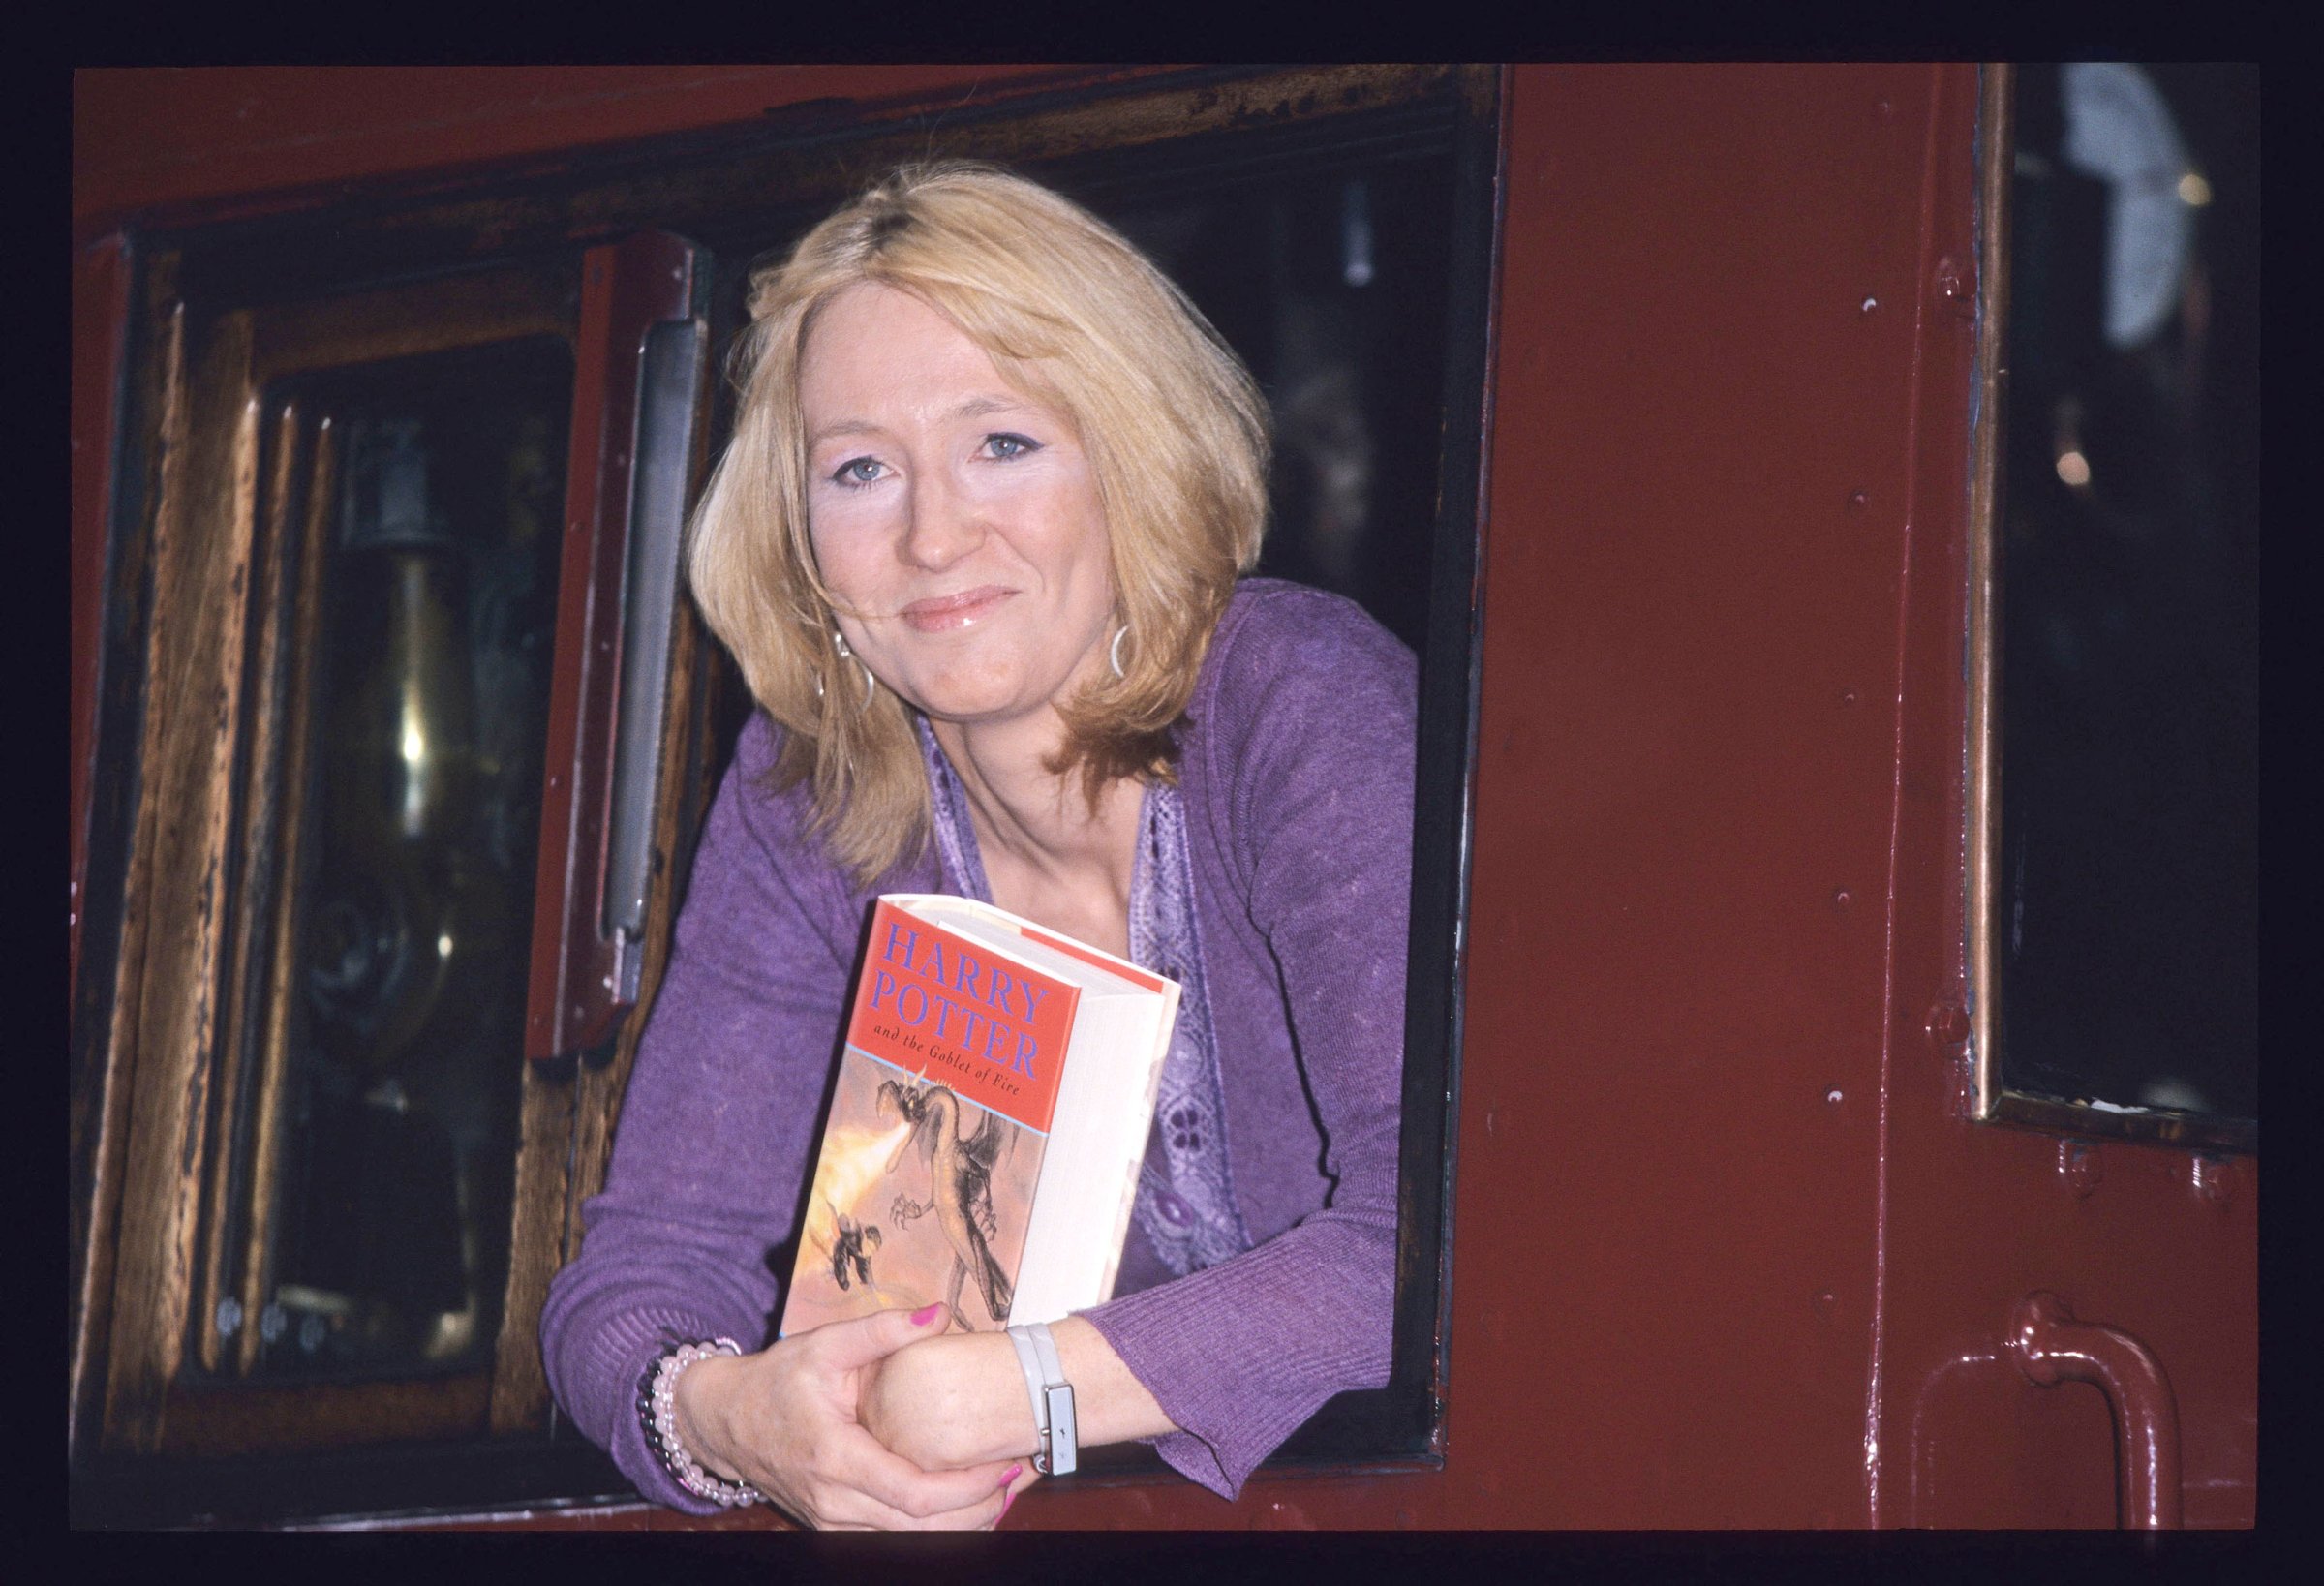 Archive Images of JK Rowling at the launch of Harry Potter and The Goblet of Fire